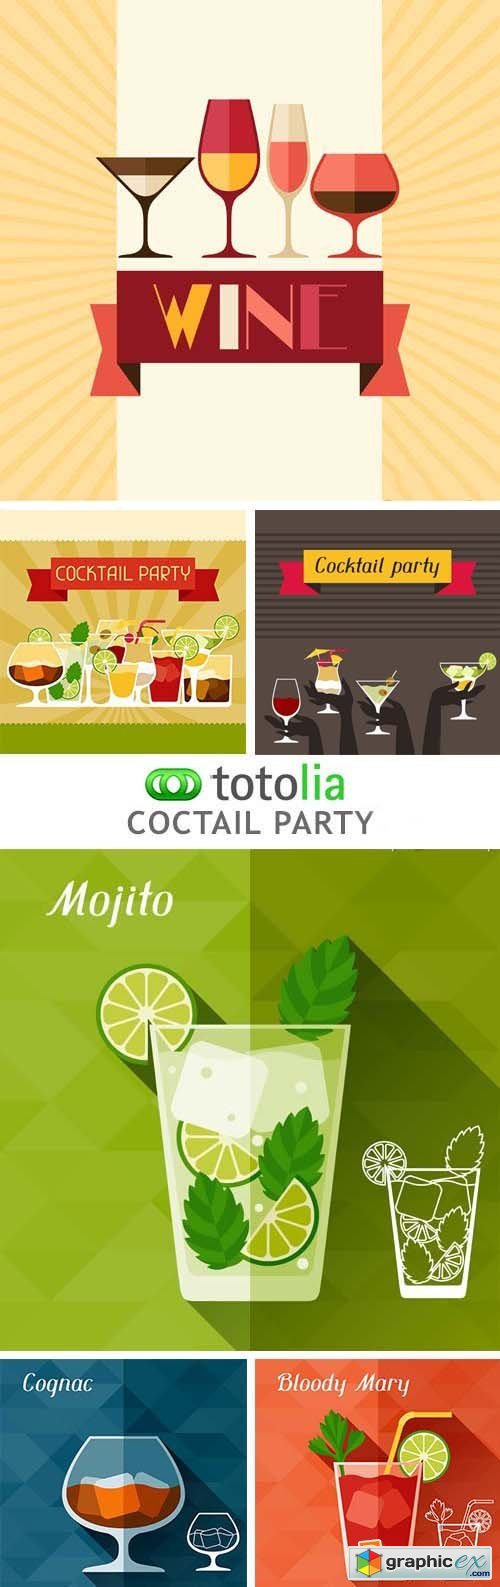 Coctail Party - 25xEPS